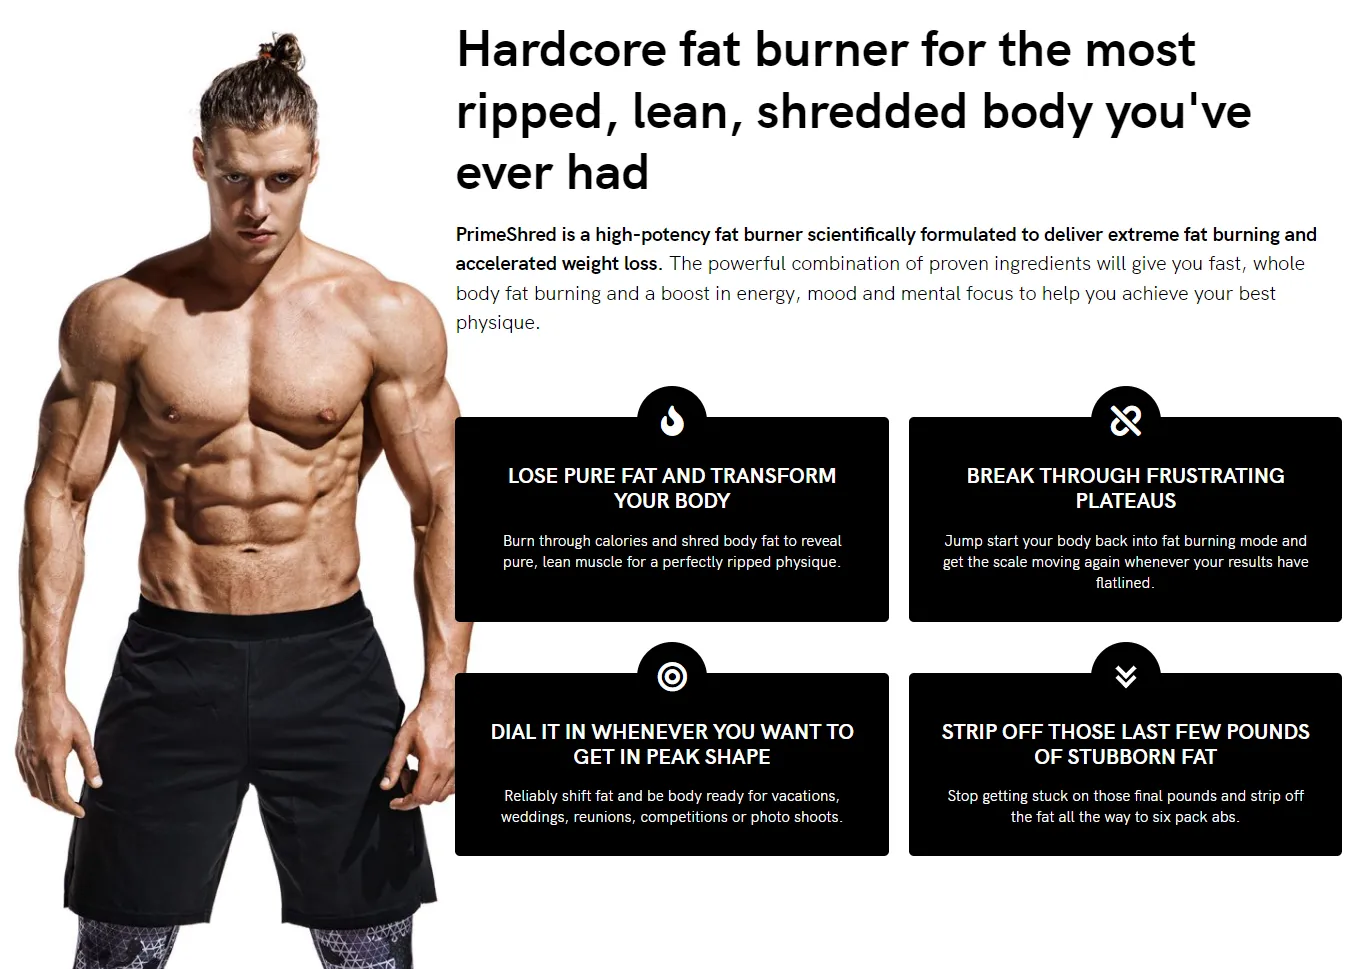 PrimeShred-hardcore-fat-burner-for-the-most-ripped-lean-shredded-body-you-have-ever-had